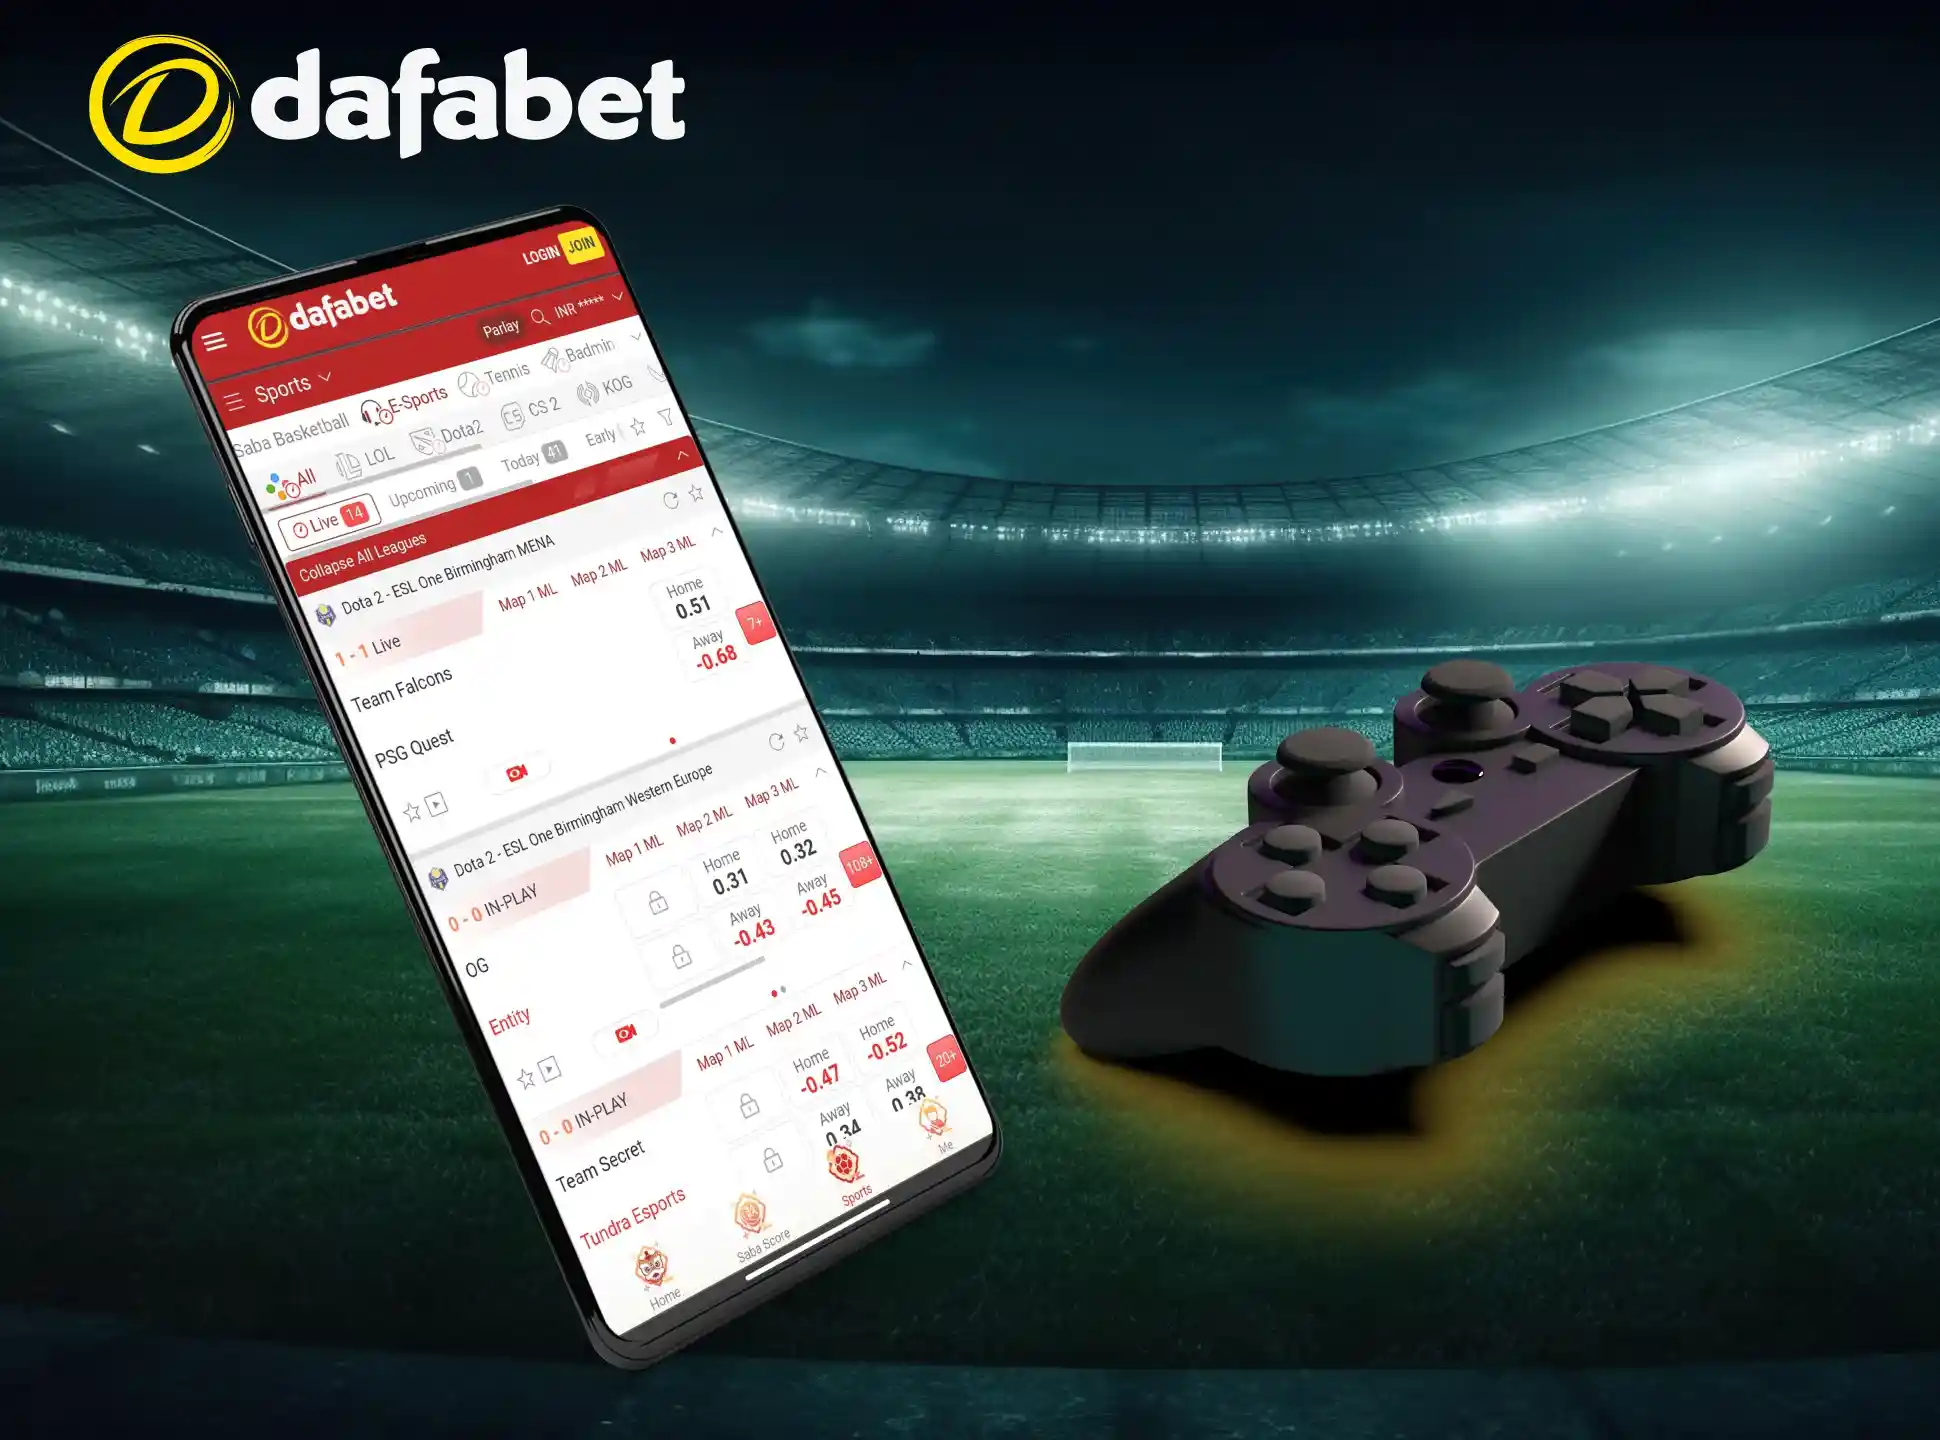 Over 80 different ESports competitions on the Dafabet app.